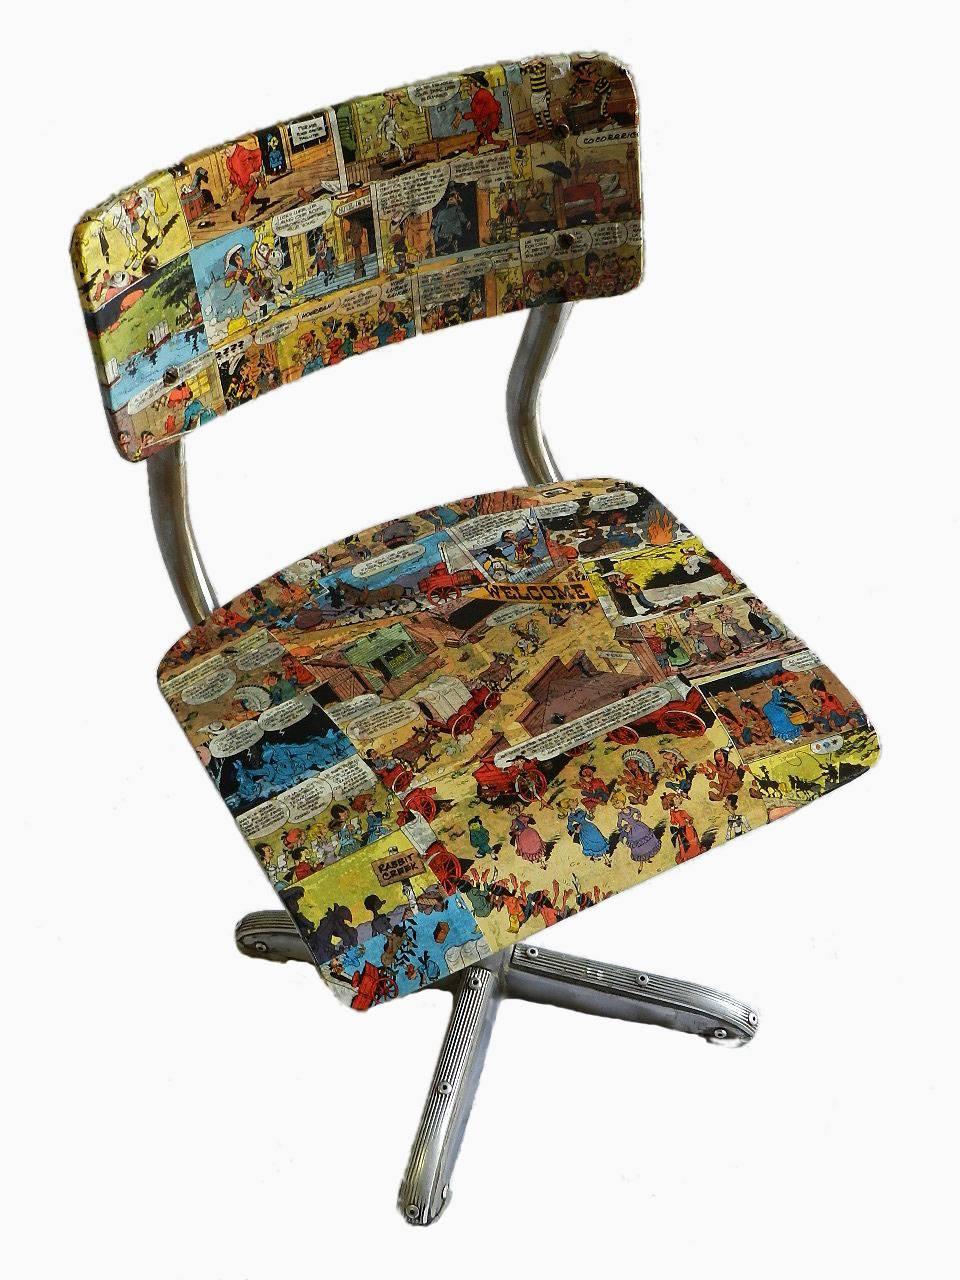 Découpage Pair of Mid-Century Bentwood Child's Chairs, 1950s childrens comic decoupage